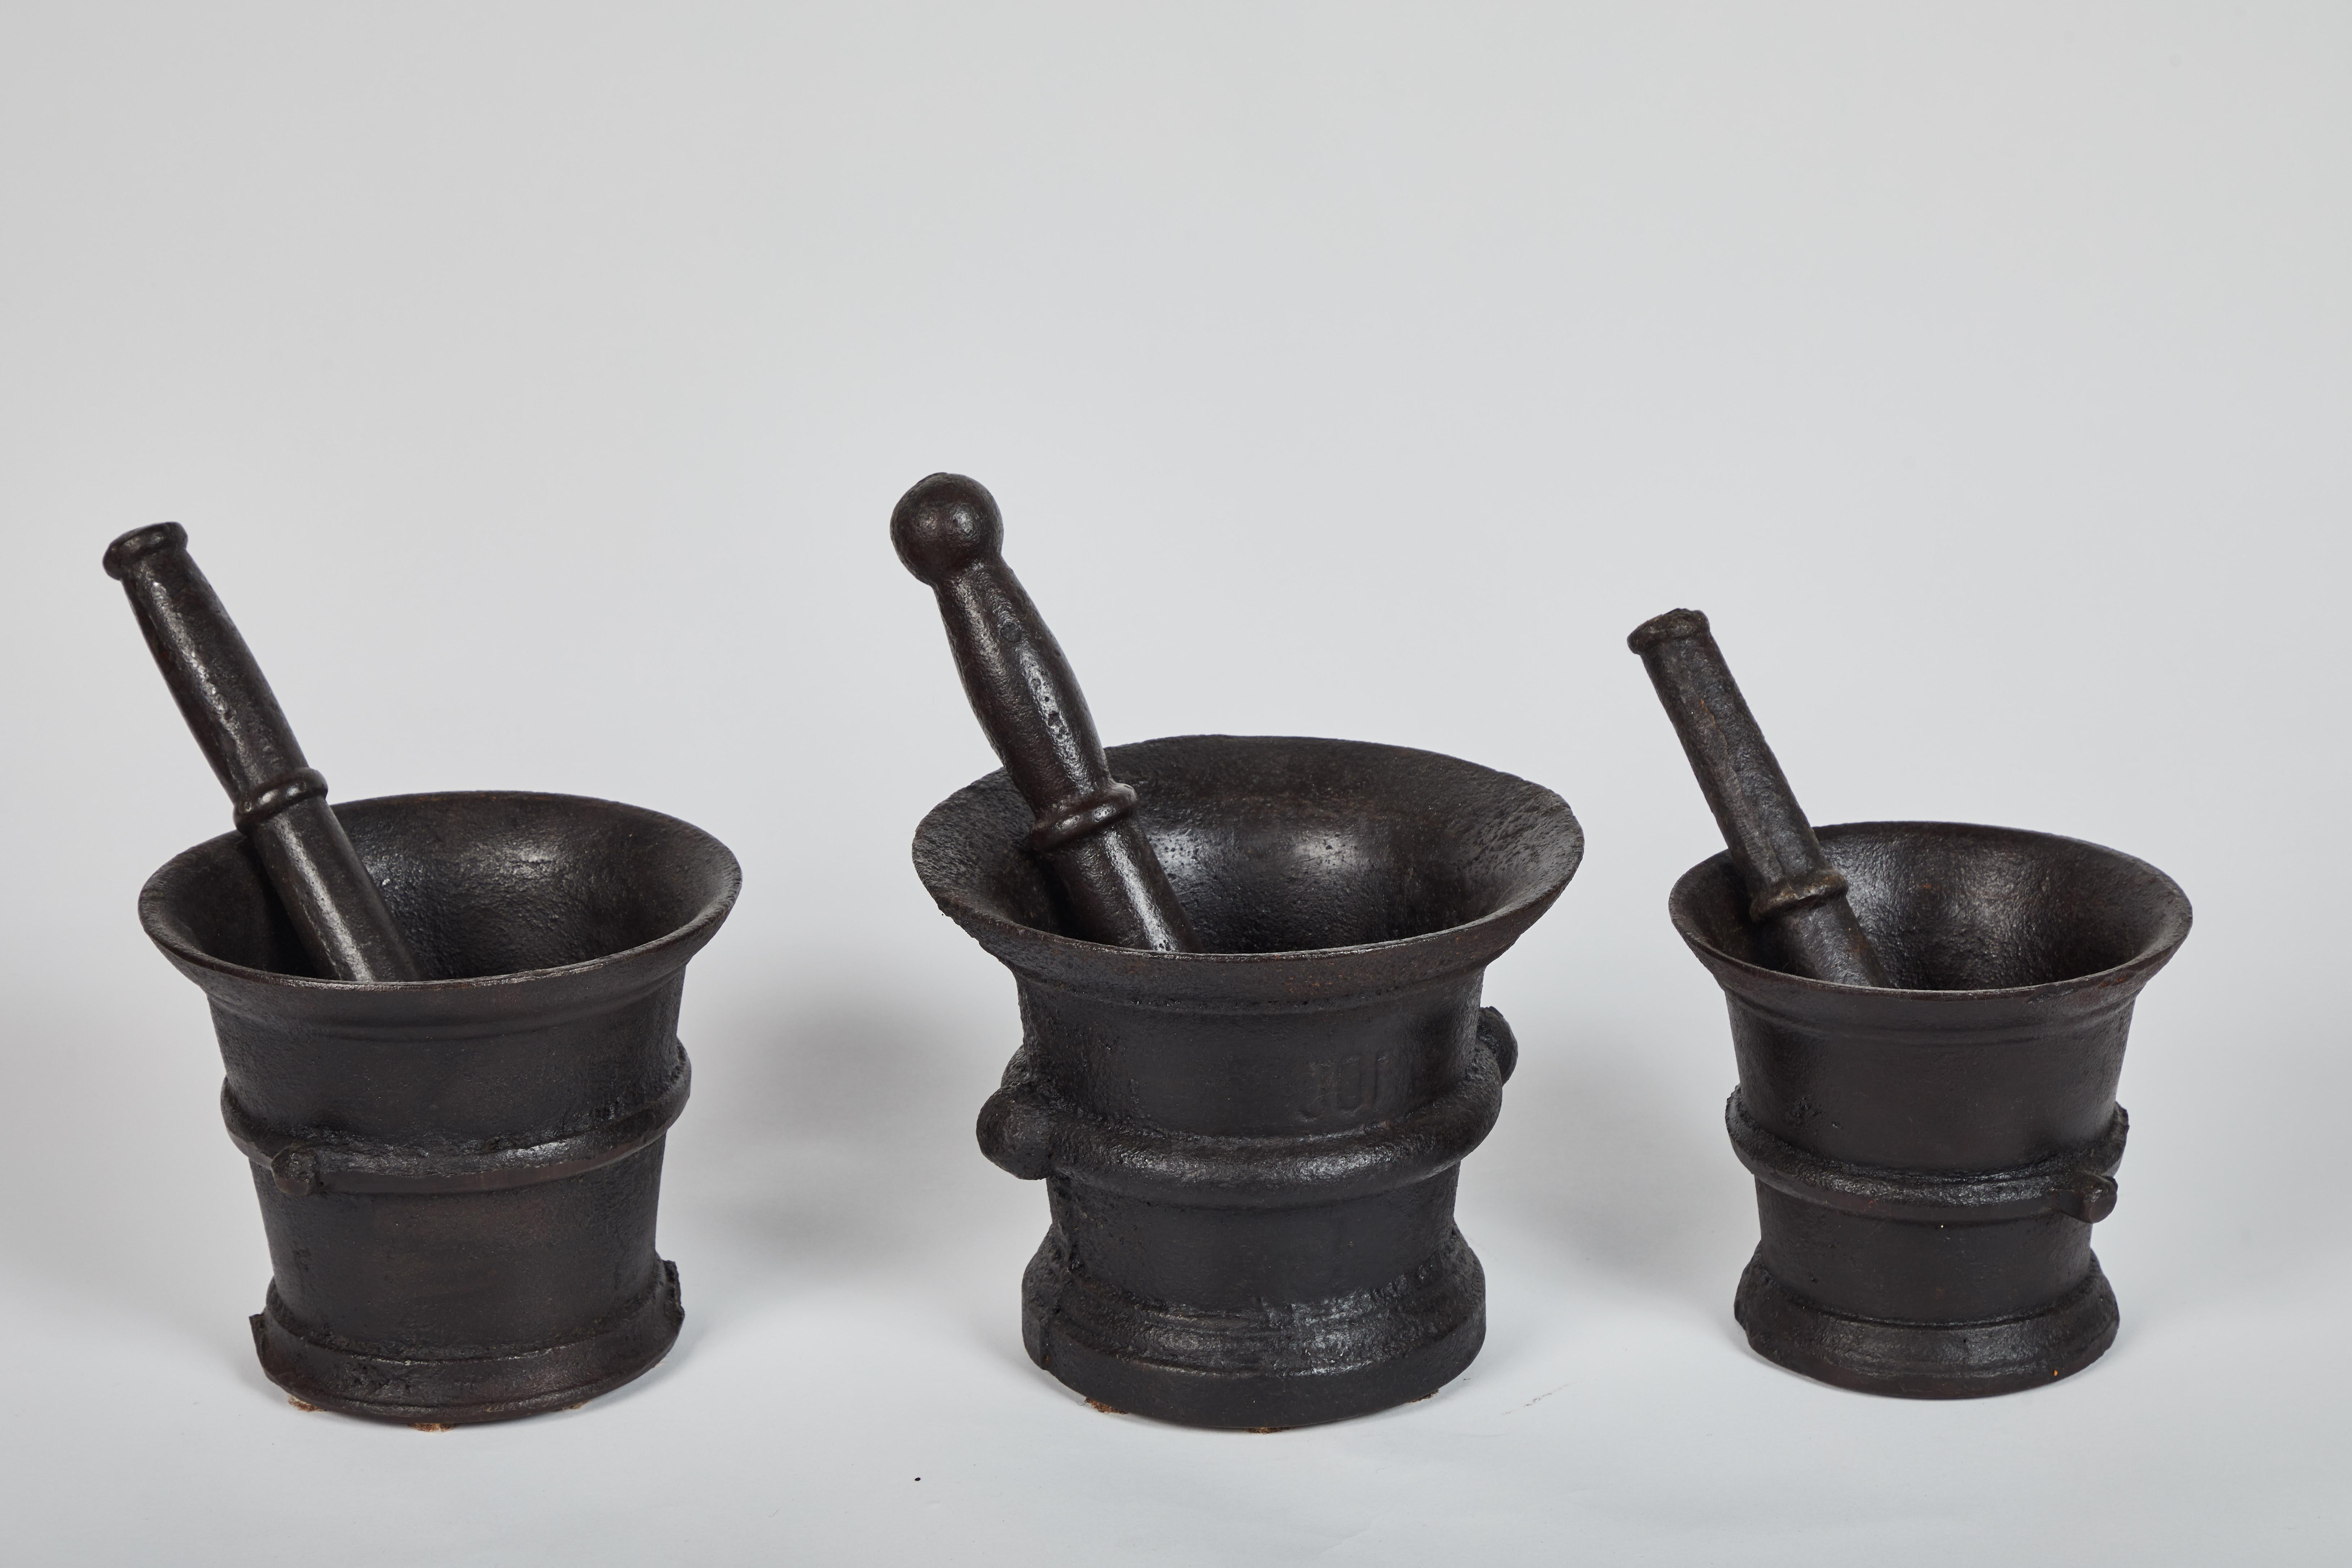 Rustic Set of 3 Indonesian Cast Iron Mortar and Pestle